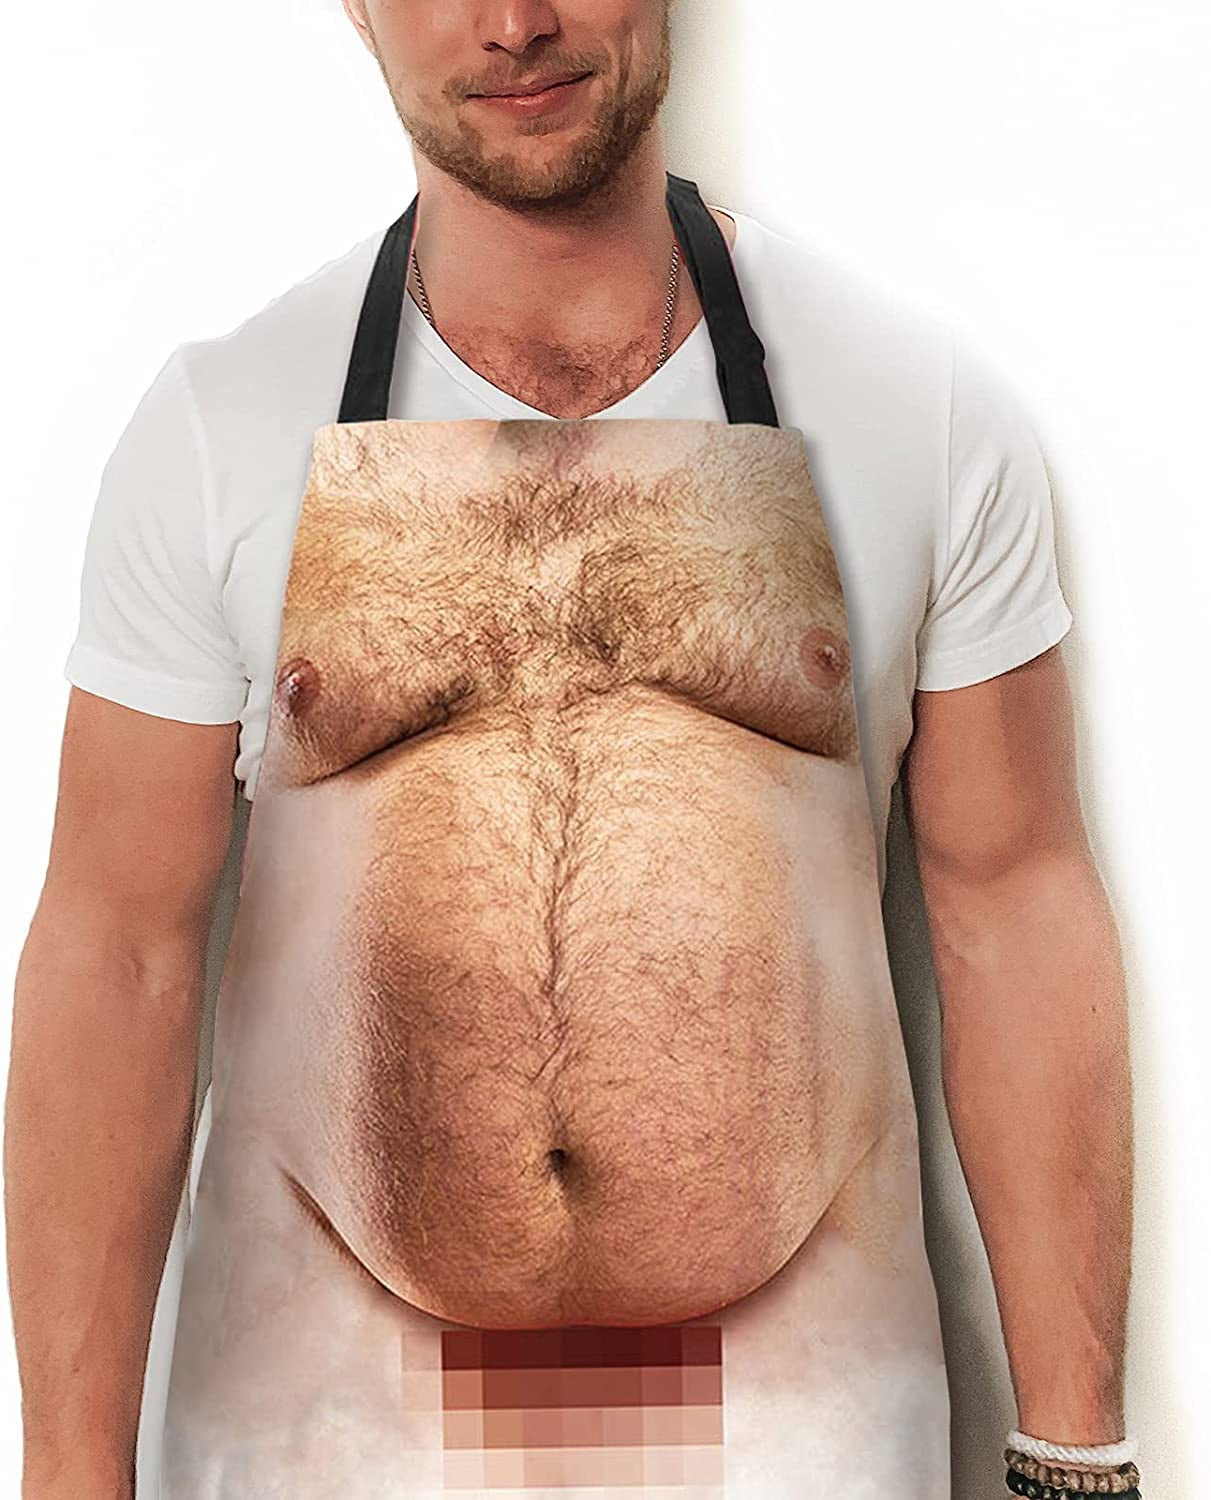 Nonebranded Funny Aprons for Men Adjustable Bib BBQ Cooking Kitchen  Grilling Belly Aprons Gag Gifts for Christmas, White Elephant Gift Exchange